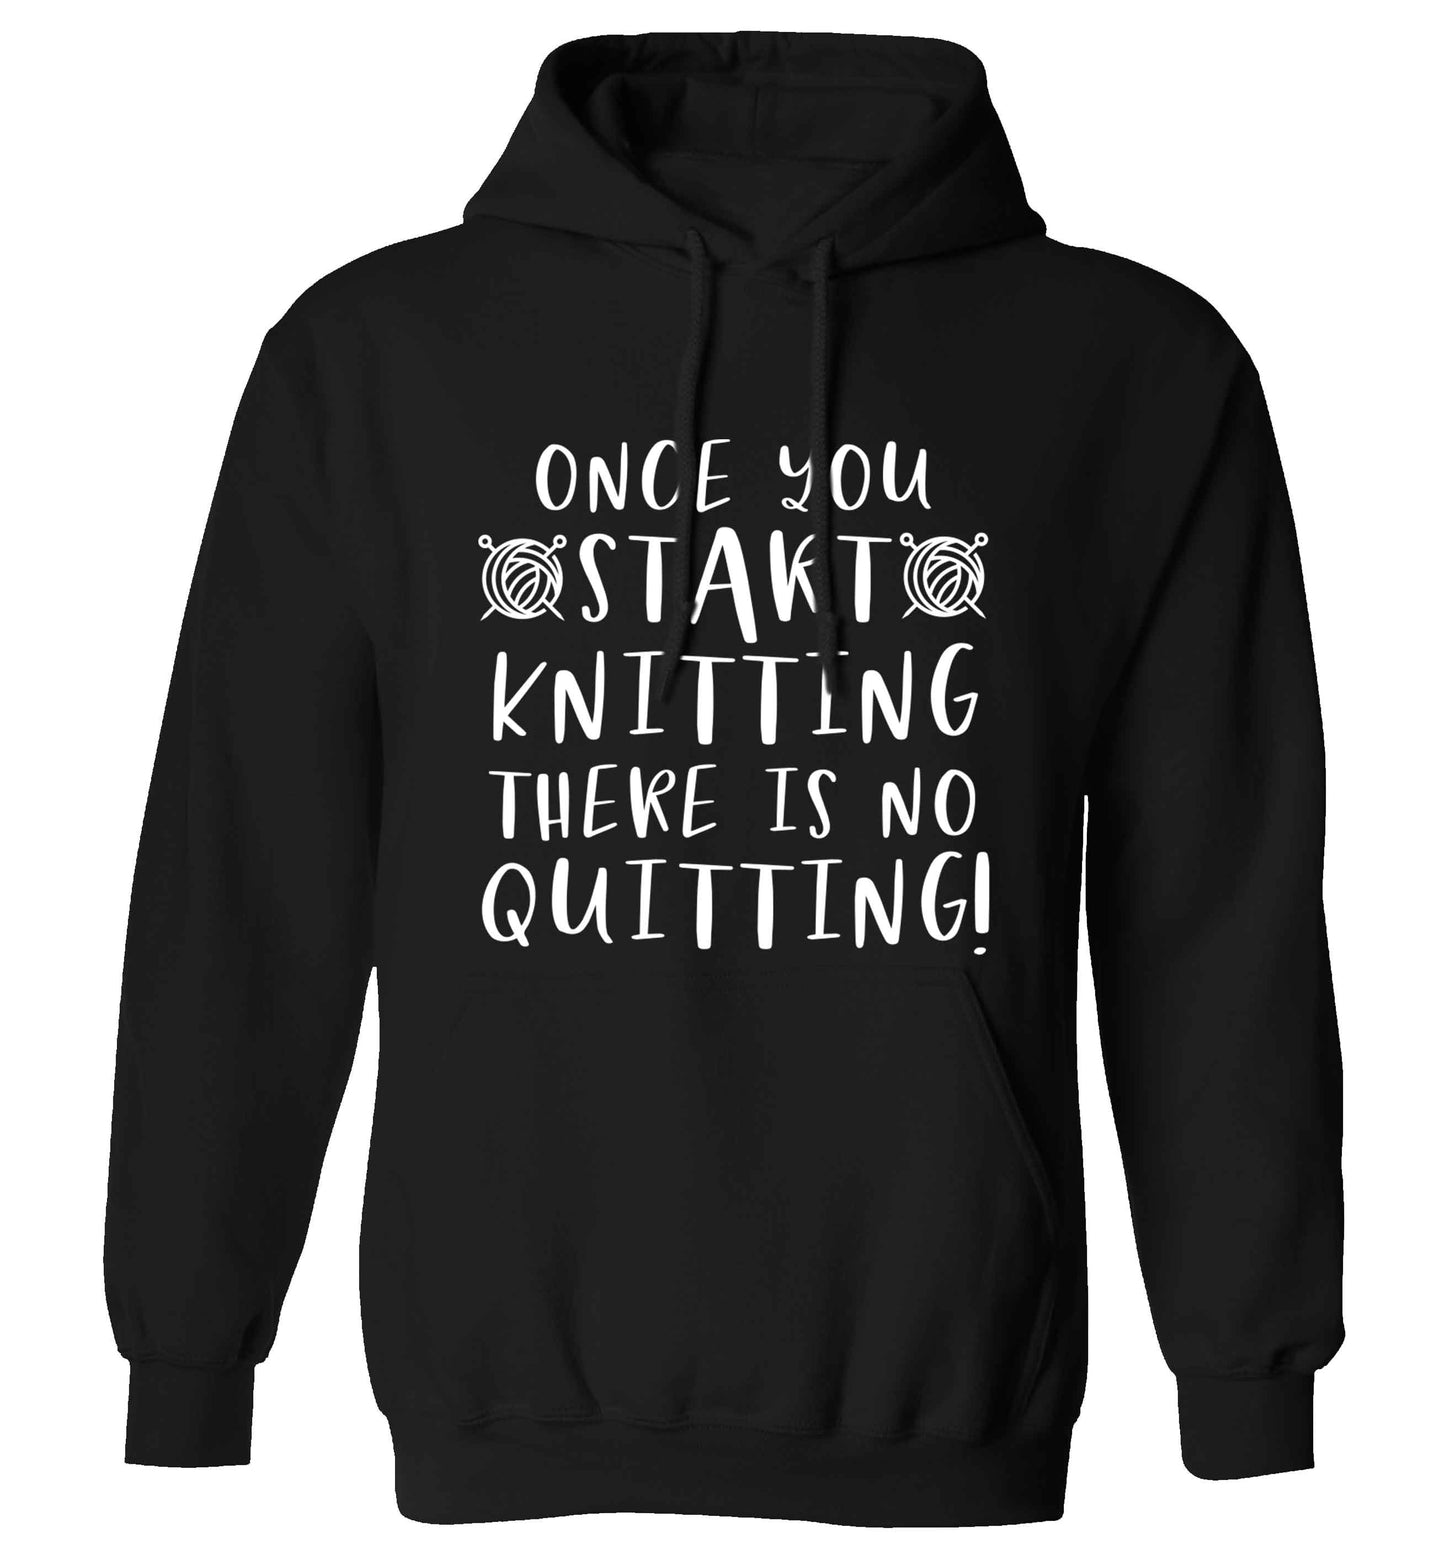 Once you start knitting there is no quitting! adults unisex black hoodie 2XL